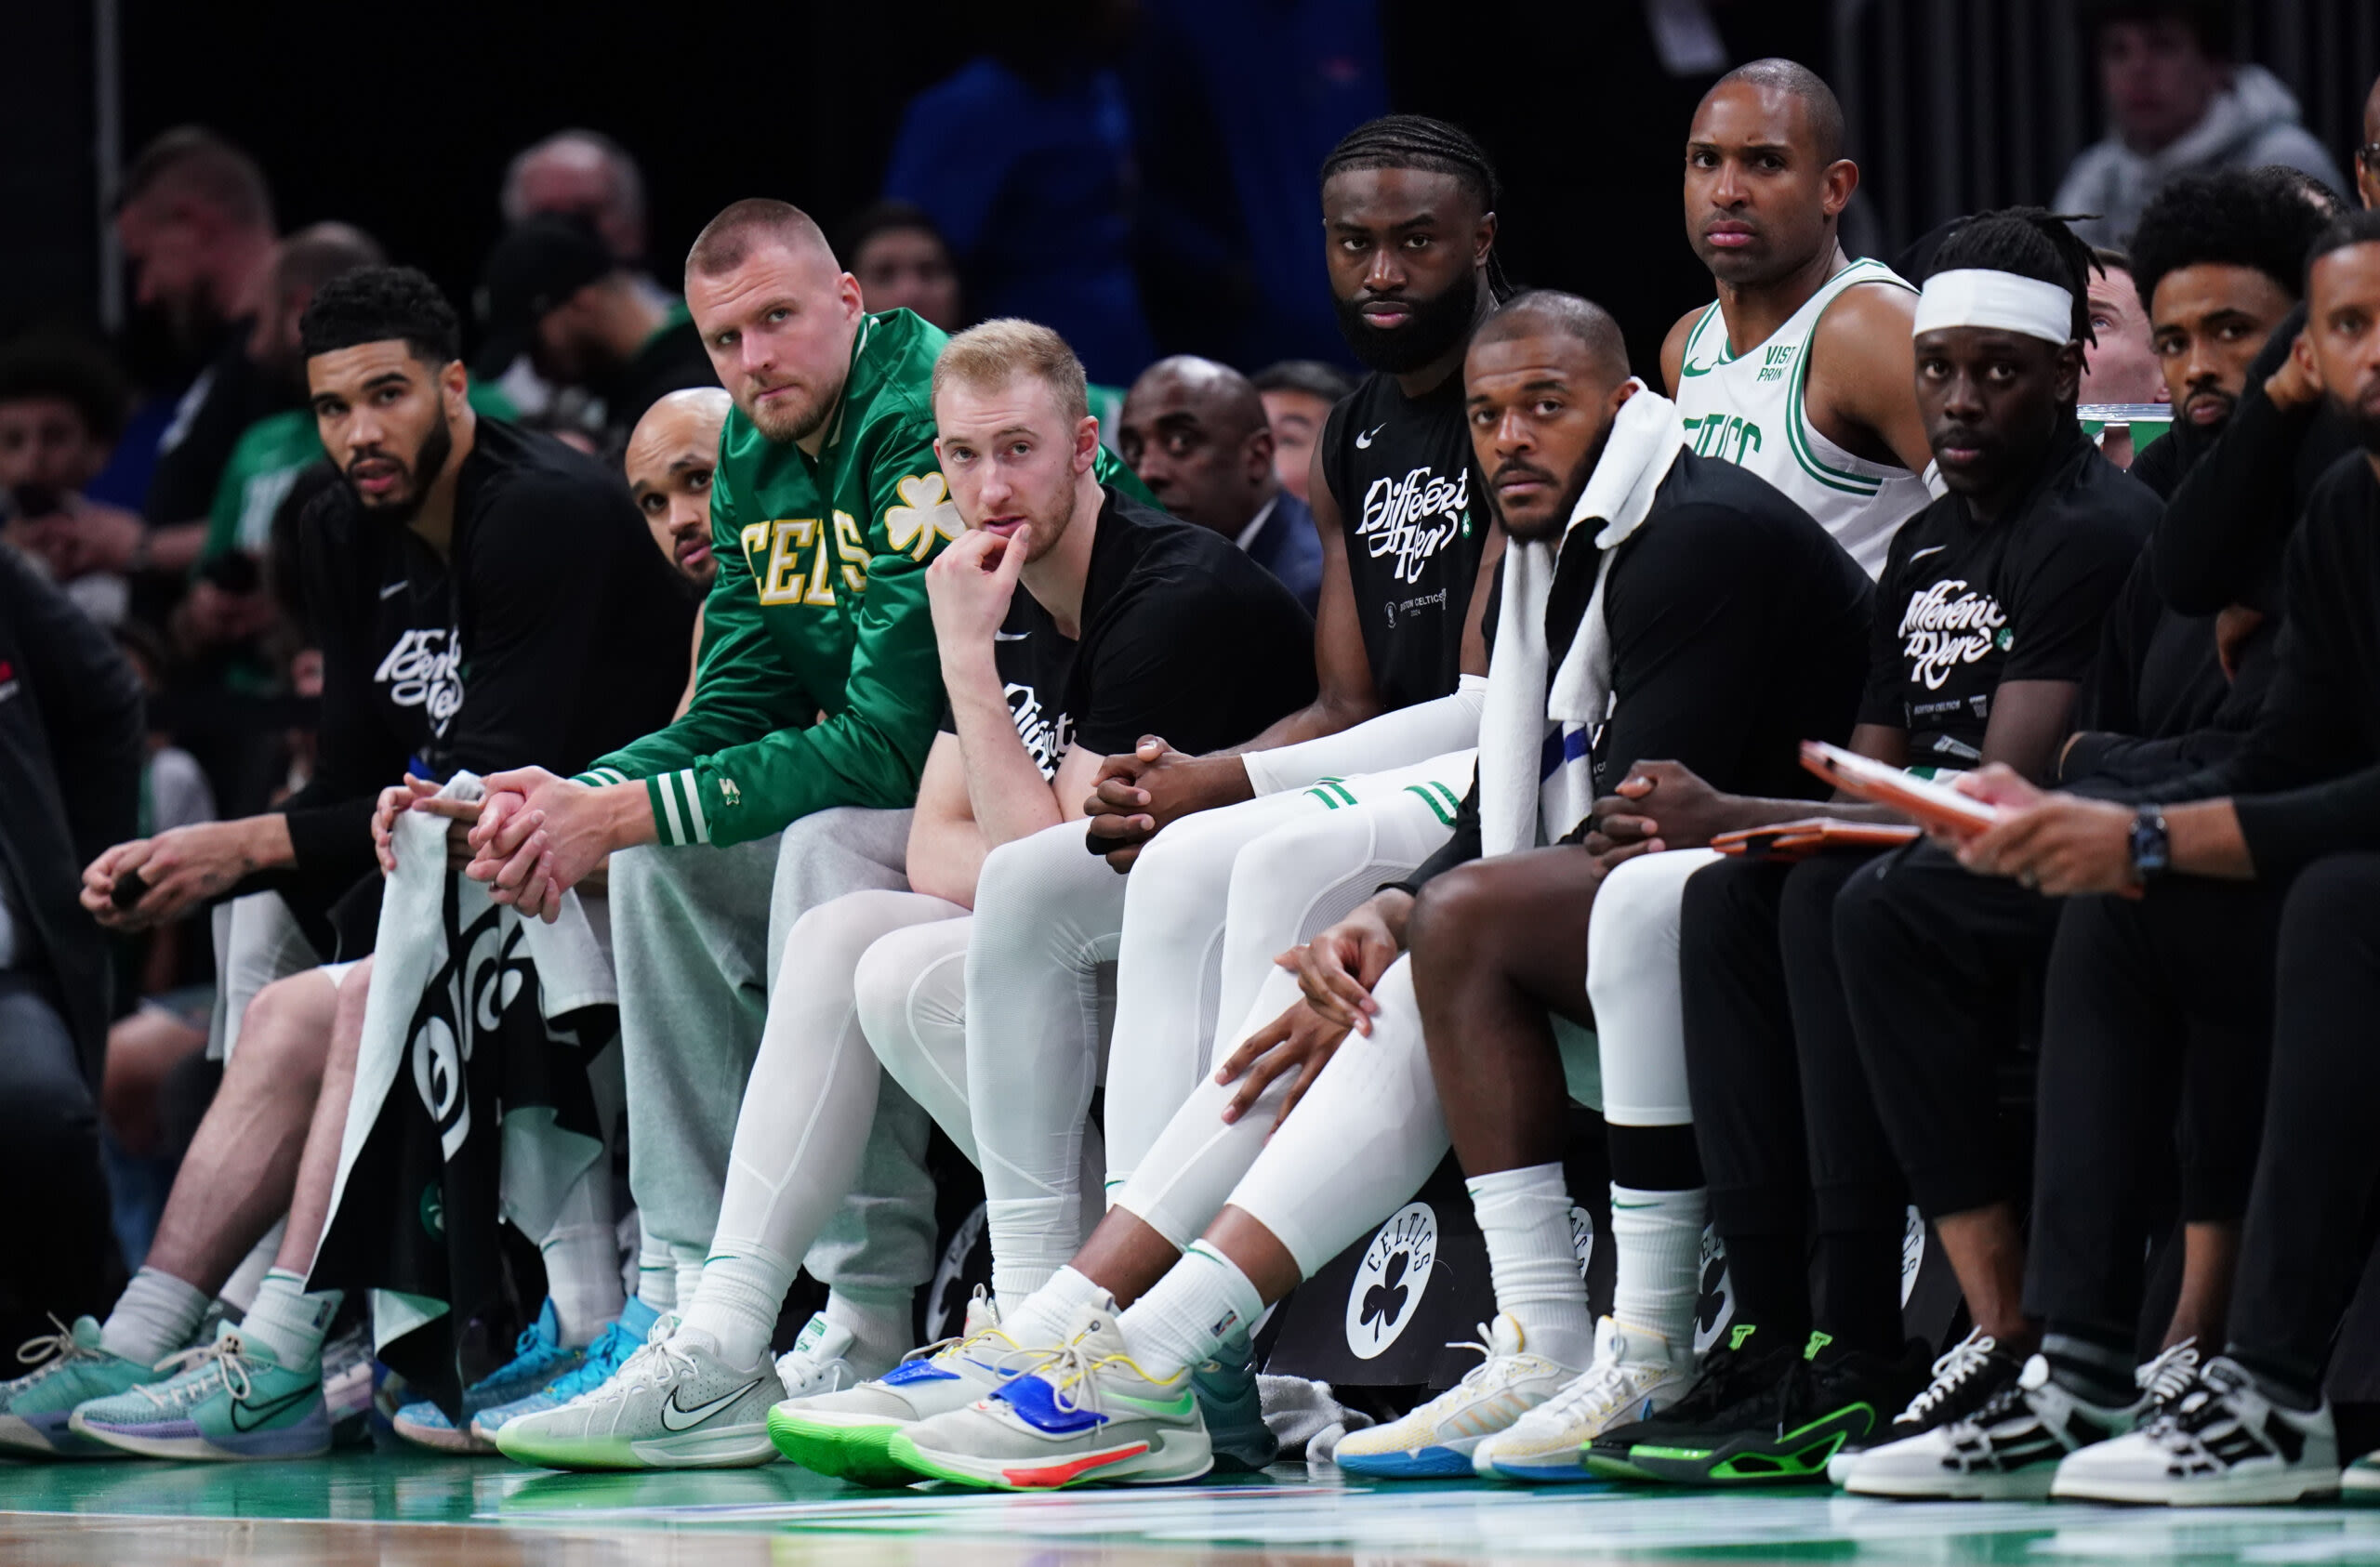 Boston’s Kristaps Porzingis seen working out with Celtics ahead of Game 3